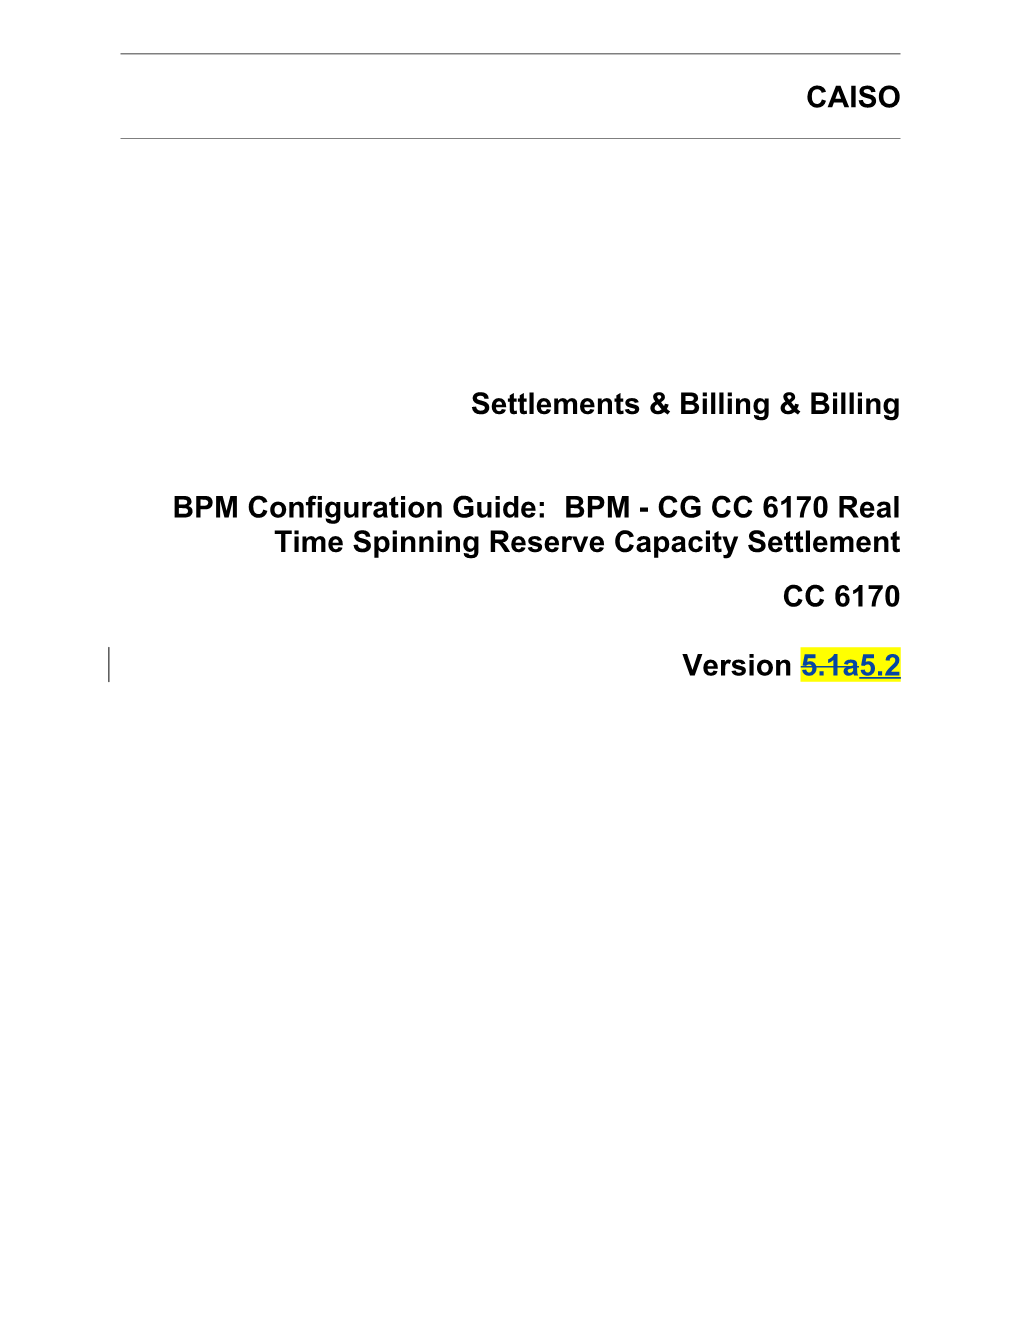 BPM - CG CC 6170 Real Time Spinning Reserve Capacity Settlement